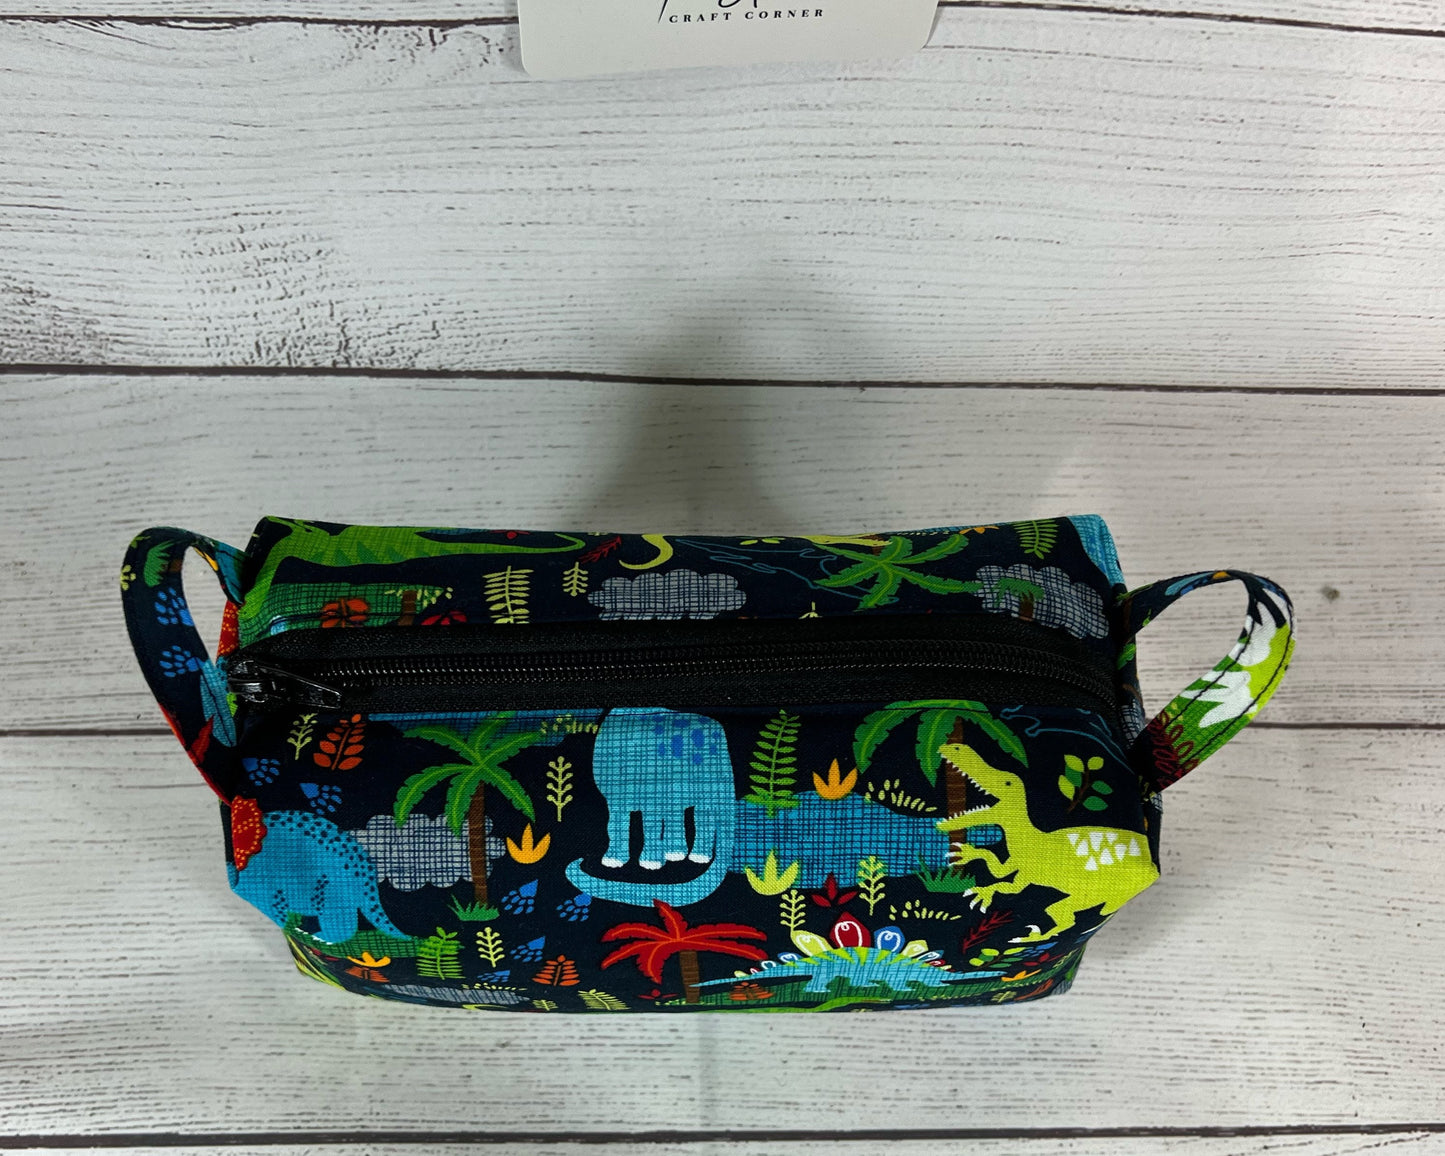 Kids Toiletry Bag - Kids Travel Pouch - Zip Pouch - Kids Pouch - Kids Zippered Carry Case - Bathroom Travel Pouch - Travel Bag - Traveling